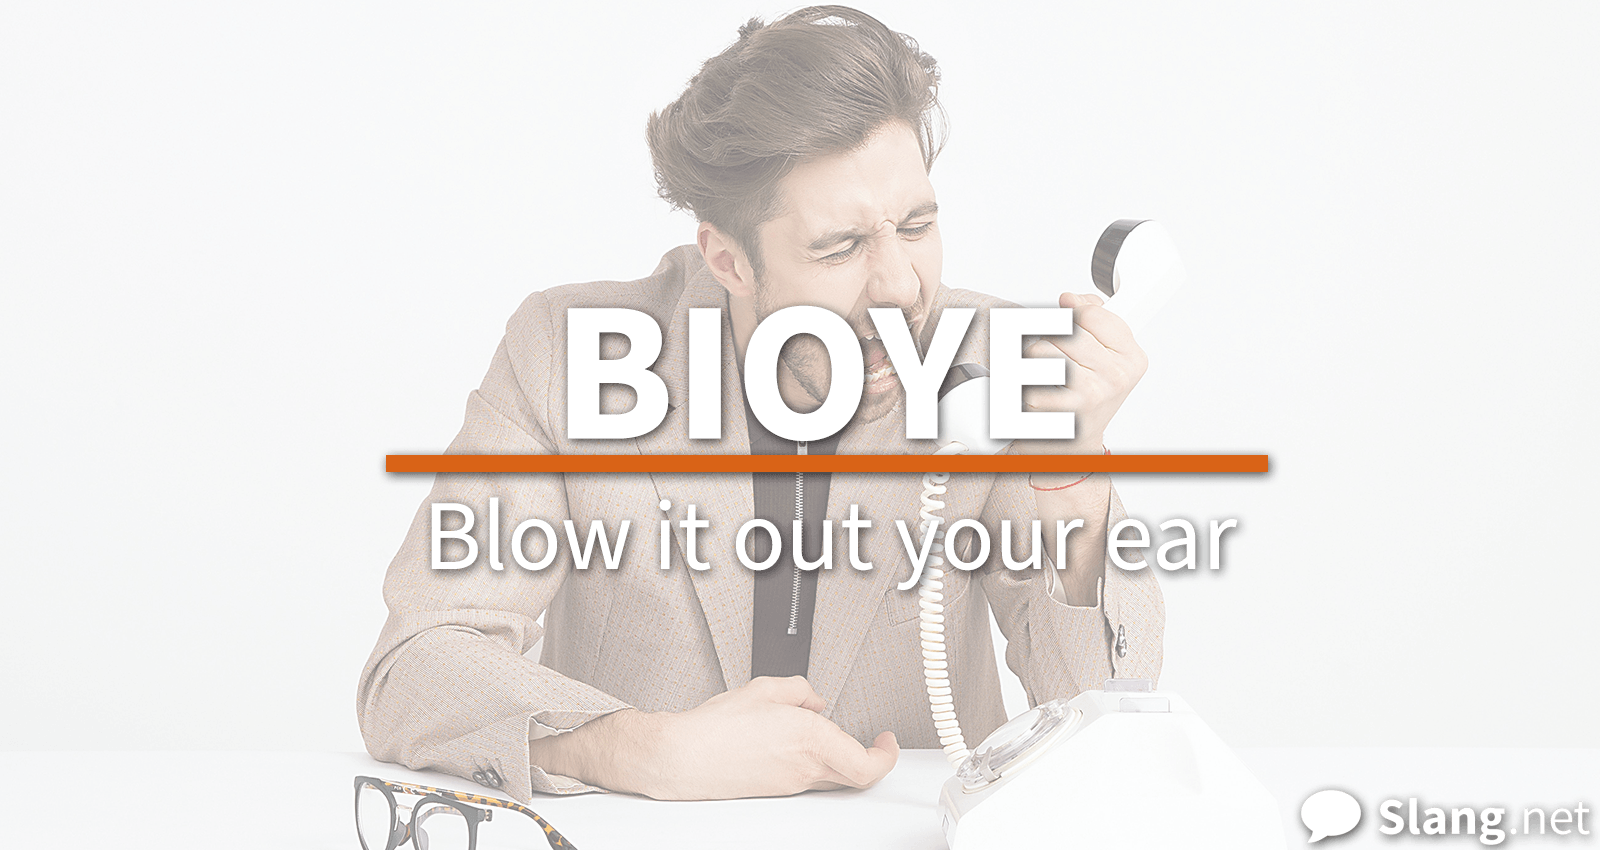 BIOYE stands for &quot;blow it out your ear&quot;